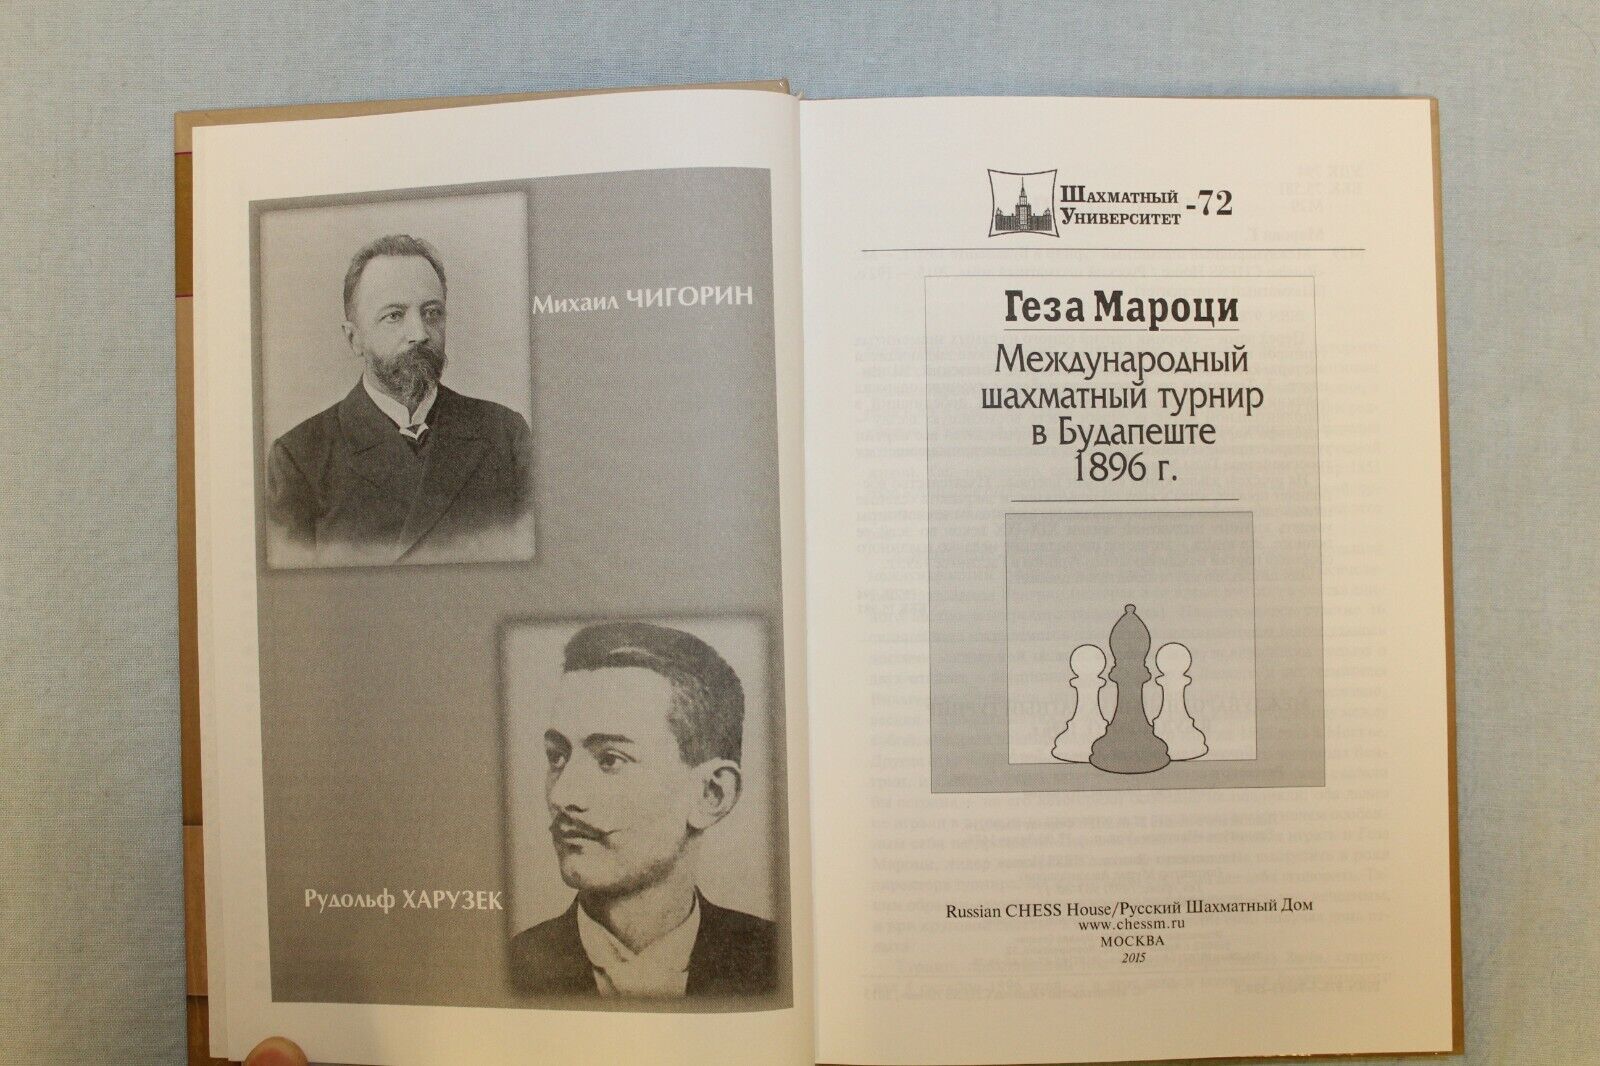 11638.Set of 2 Russian Chess Books: Tournaments Haaga-Moscow 1948 & Budapest 1896